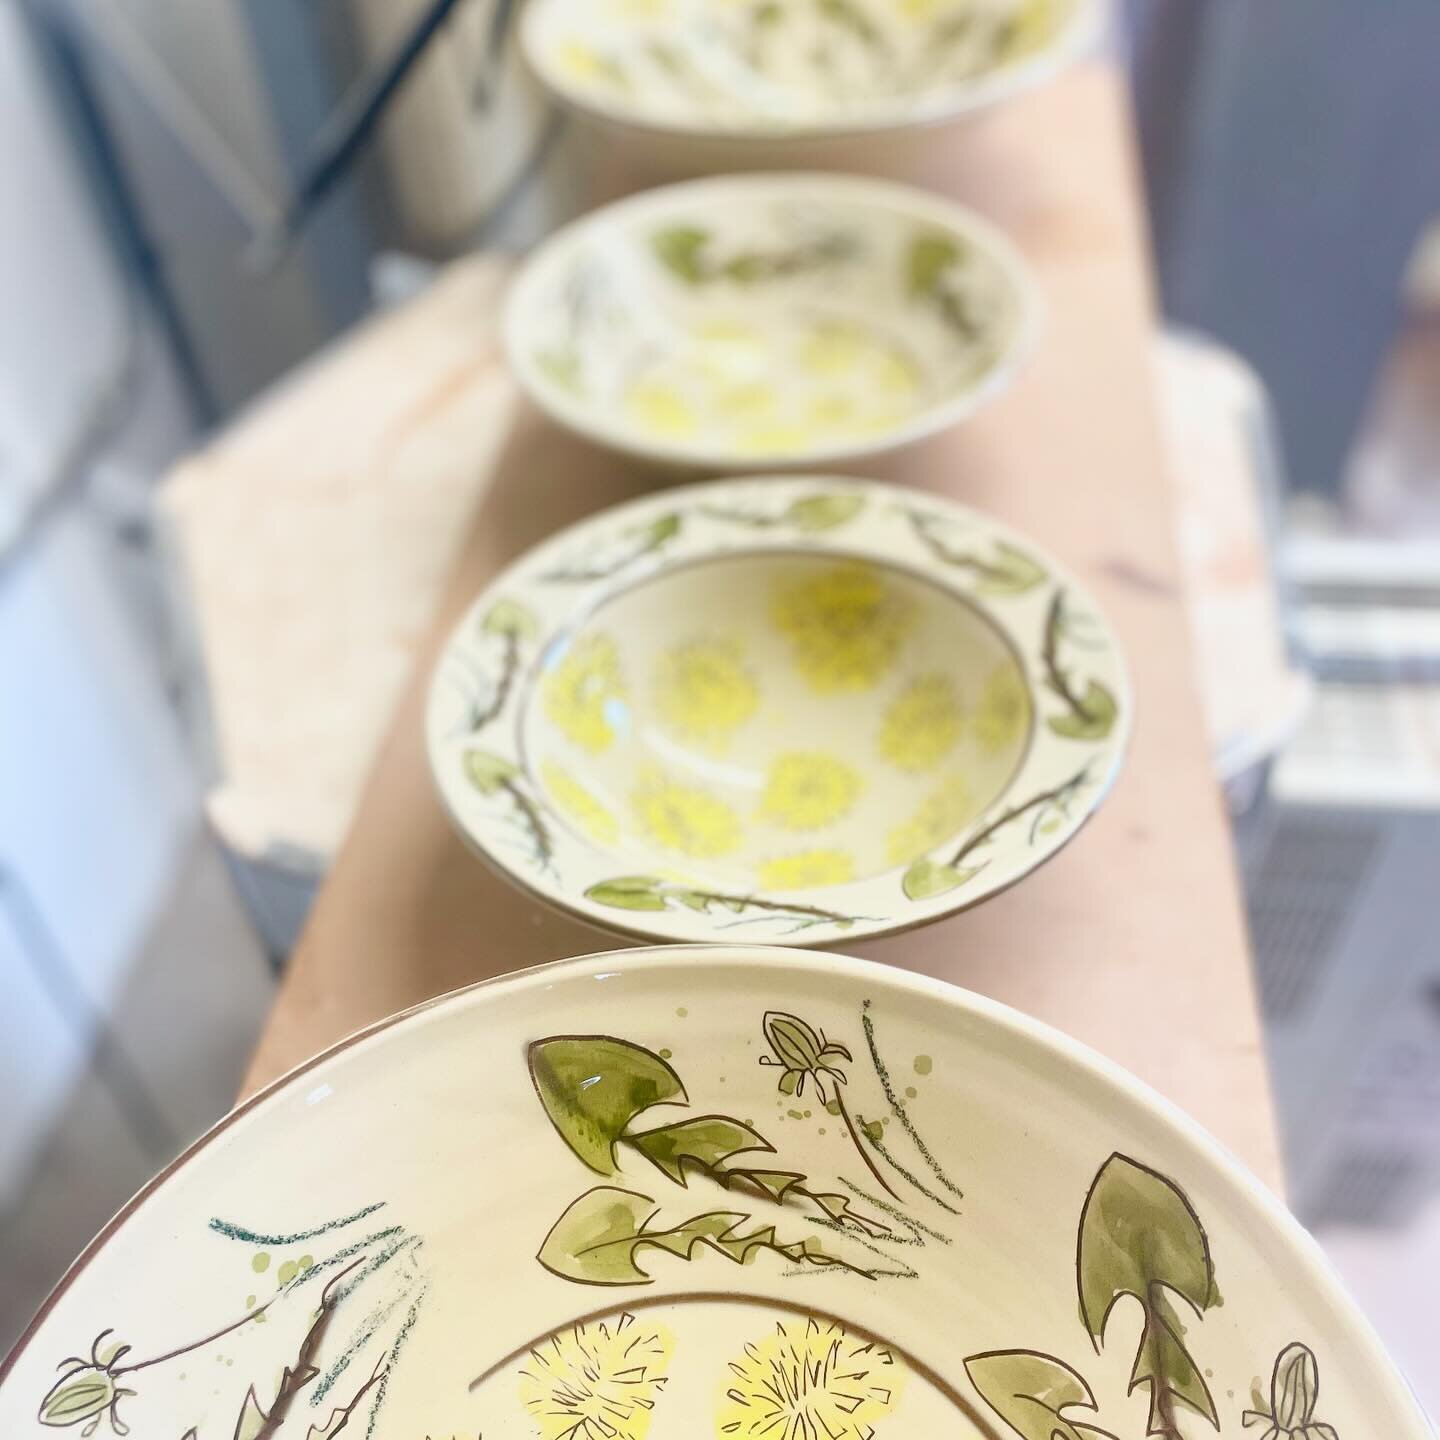 Happy International Women&rsquo;s Day!

Some dandelion bowls from my latest firing&hellip;to bring some sunshine to a dreich morning in Edinburgh.